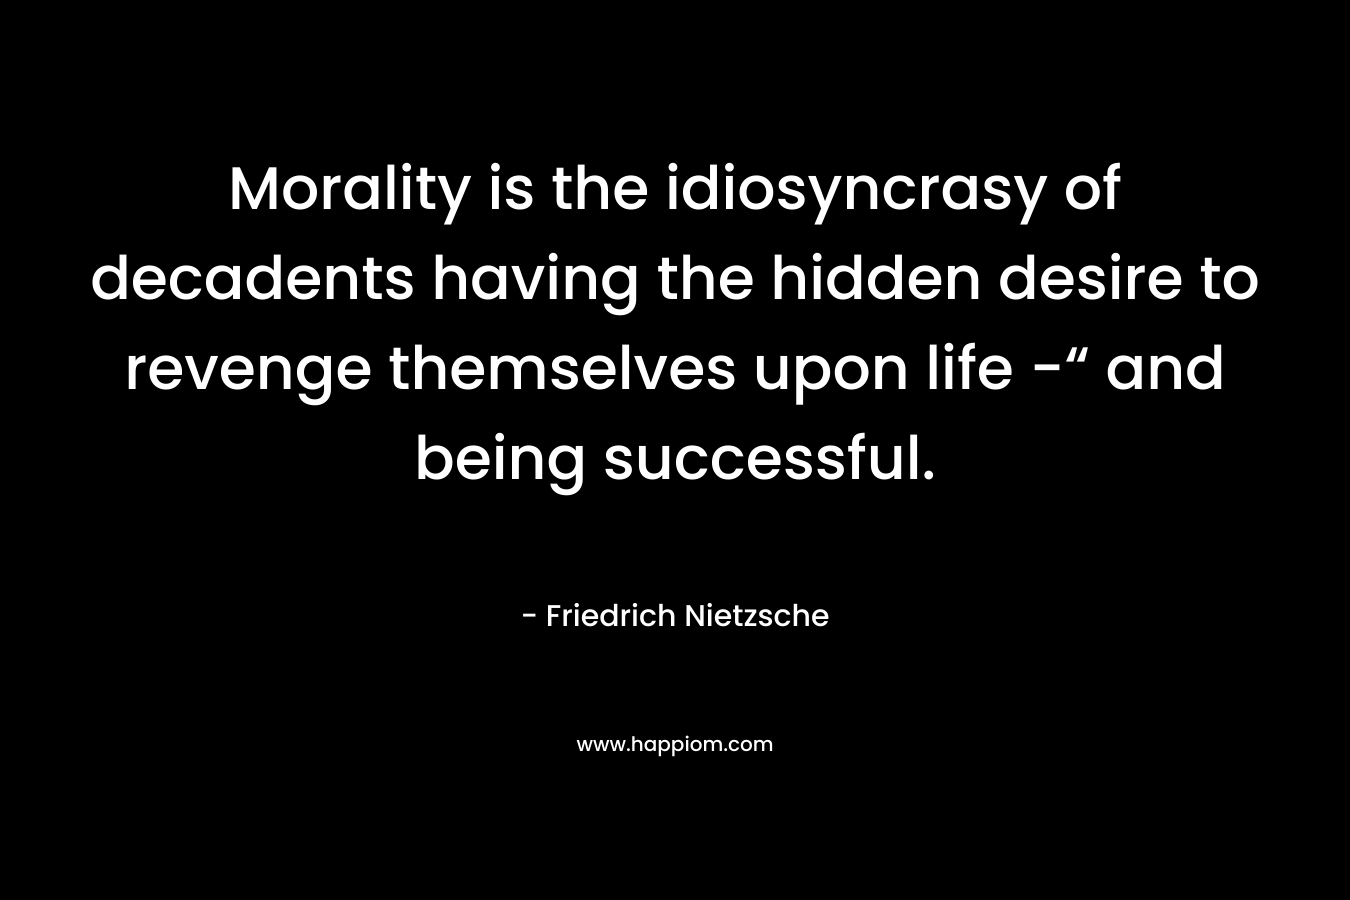 Morality is the idiosyncrasy of decadents having the hidden desire to revenge themselves upon life -“ and being successful.